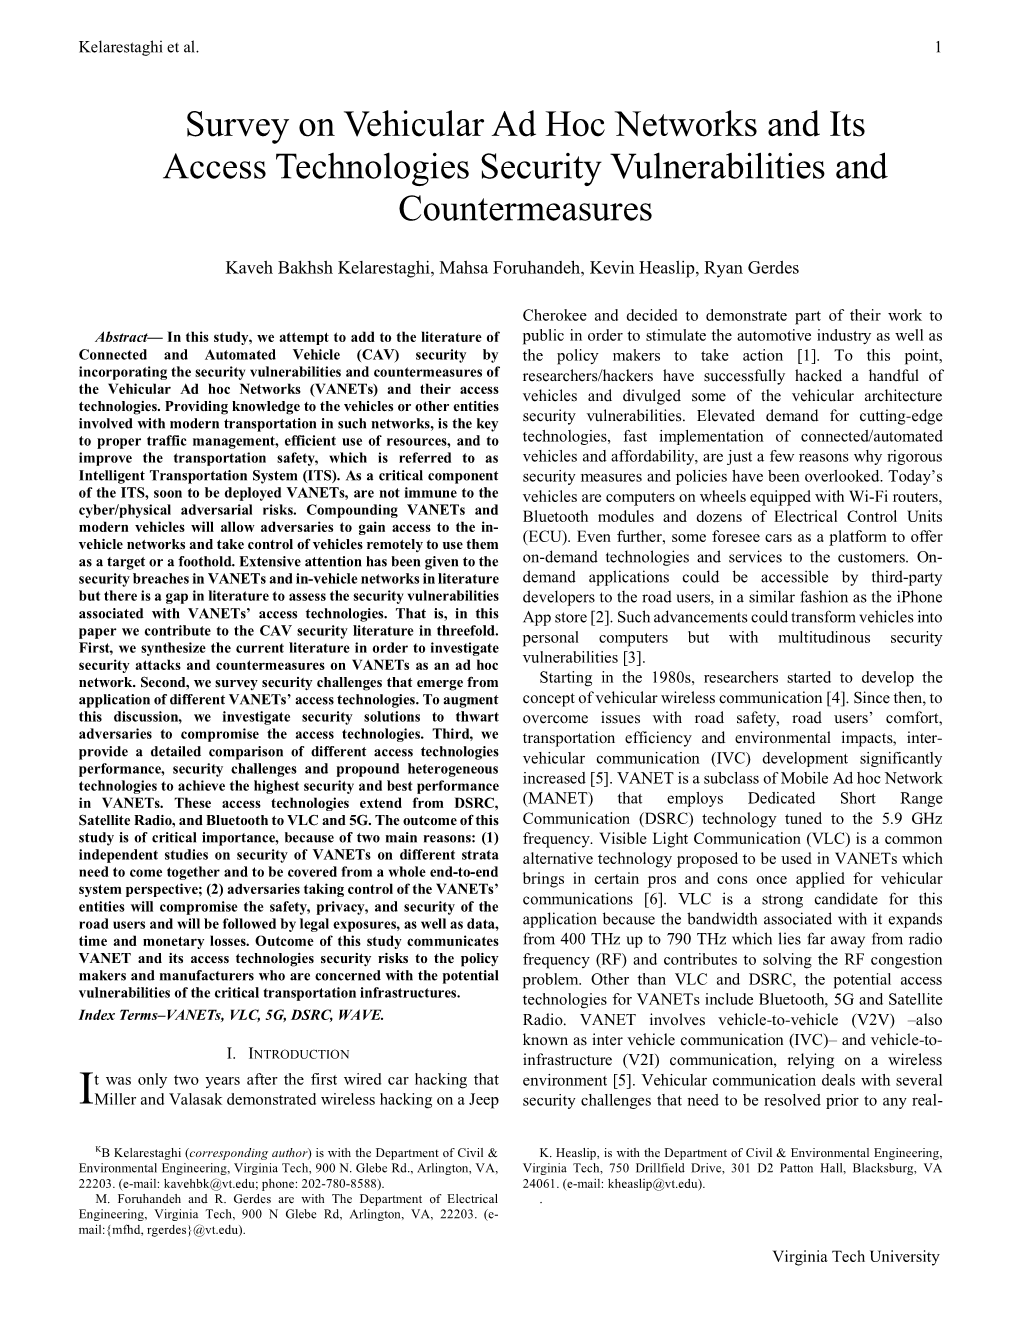 Survey on Vehicular Ad Hoc Networks and Its Access Technologies Security Vulnerabilities and Countermeasures